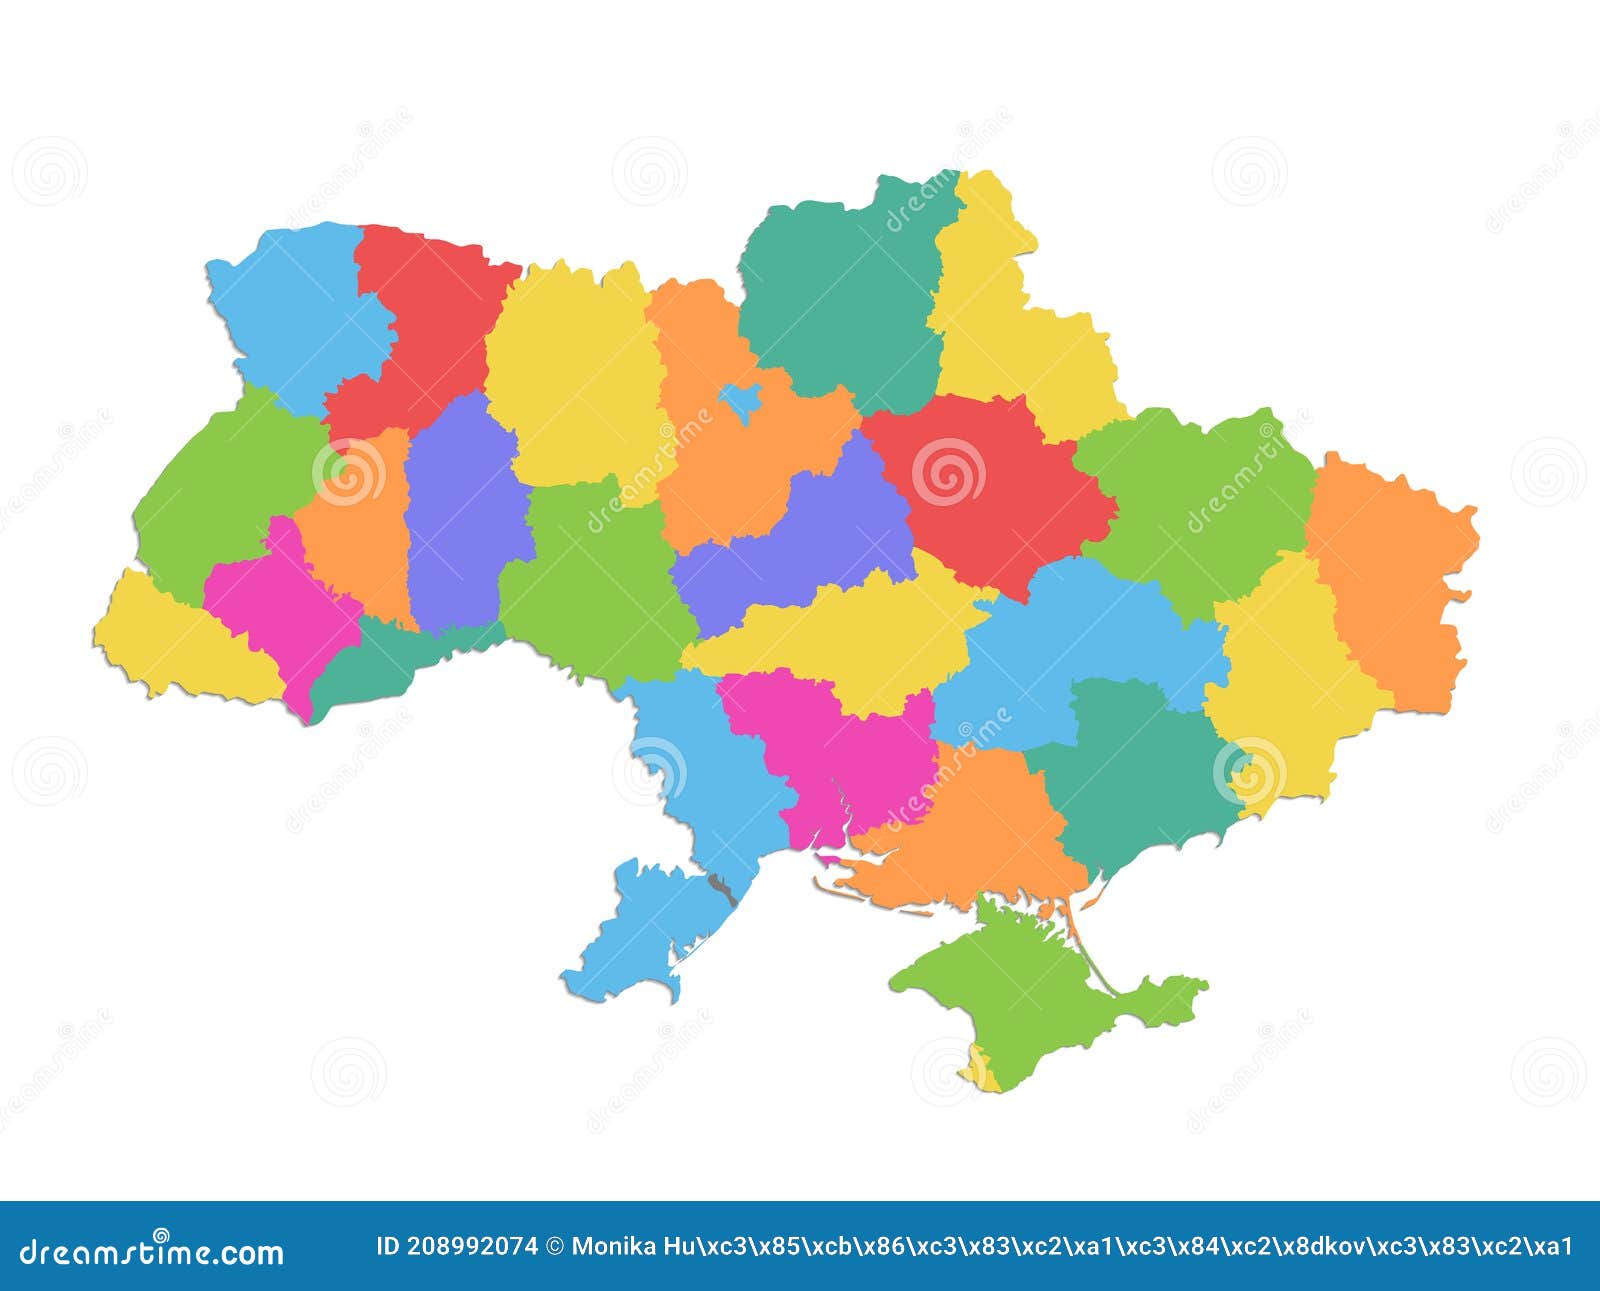 ukraine map  administrative division  separate regions  color map  on white background blank